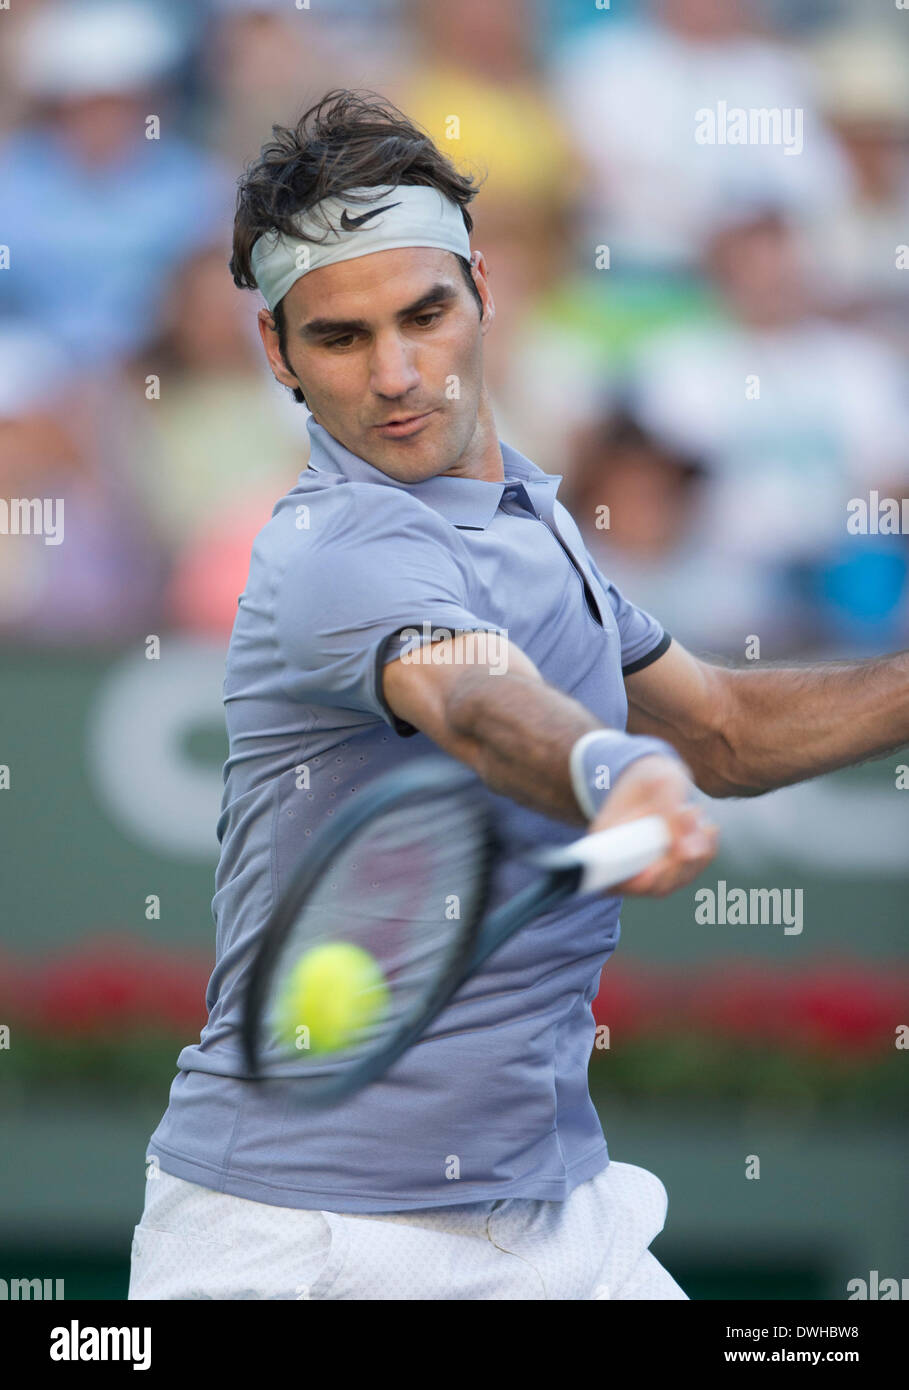 Indiana Wells, USA. 8th Mar, 2014. Roger Federer of Switzerland hits a return to Paul-Henri Mathieu of France during the BNP Paribas Open at Indian Wells Tennis Garden in Indian Wells, the United States, on March 8, 2014. Federer won 2-0. © Yang Lei/Xinhua/Alamy Live News Stock Photo